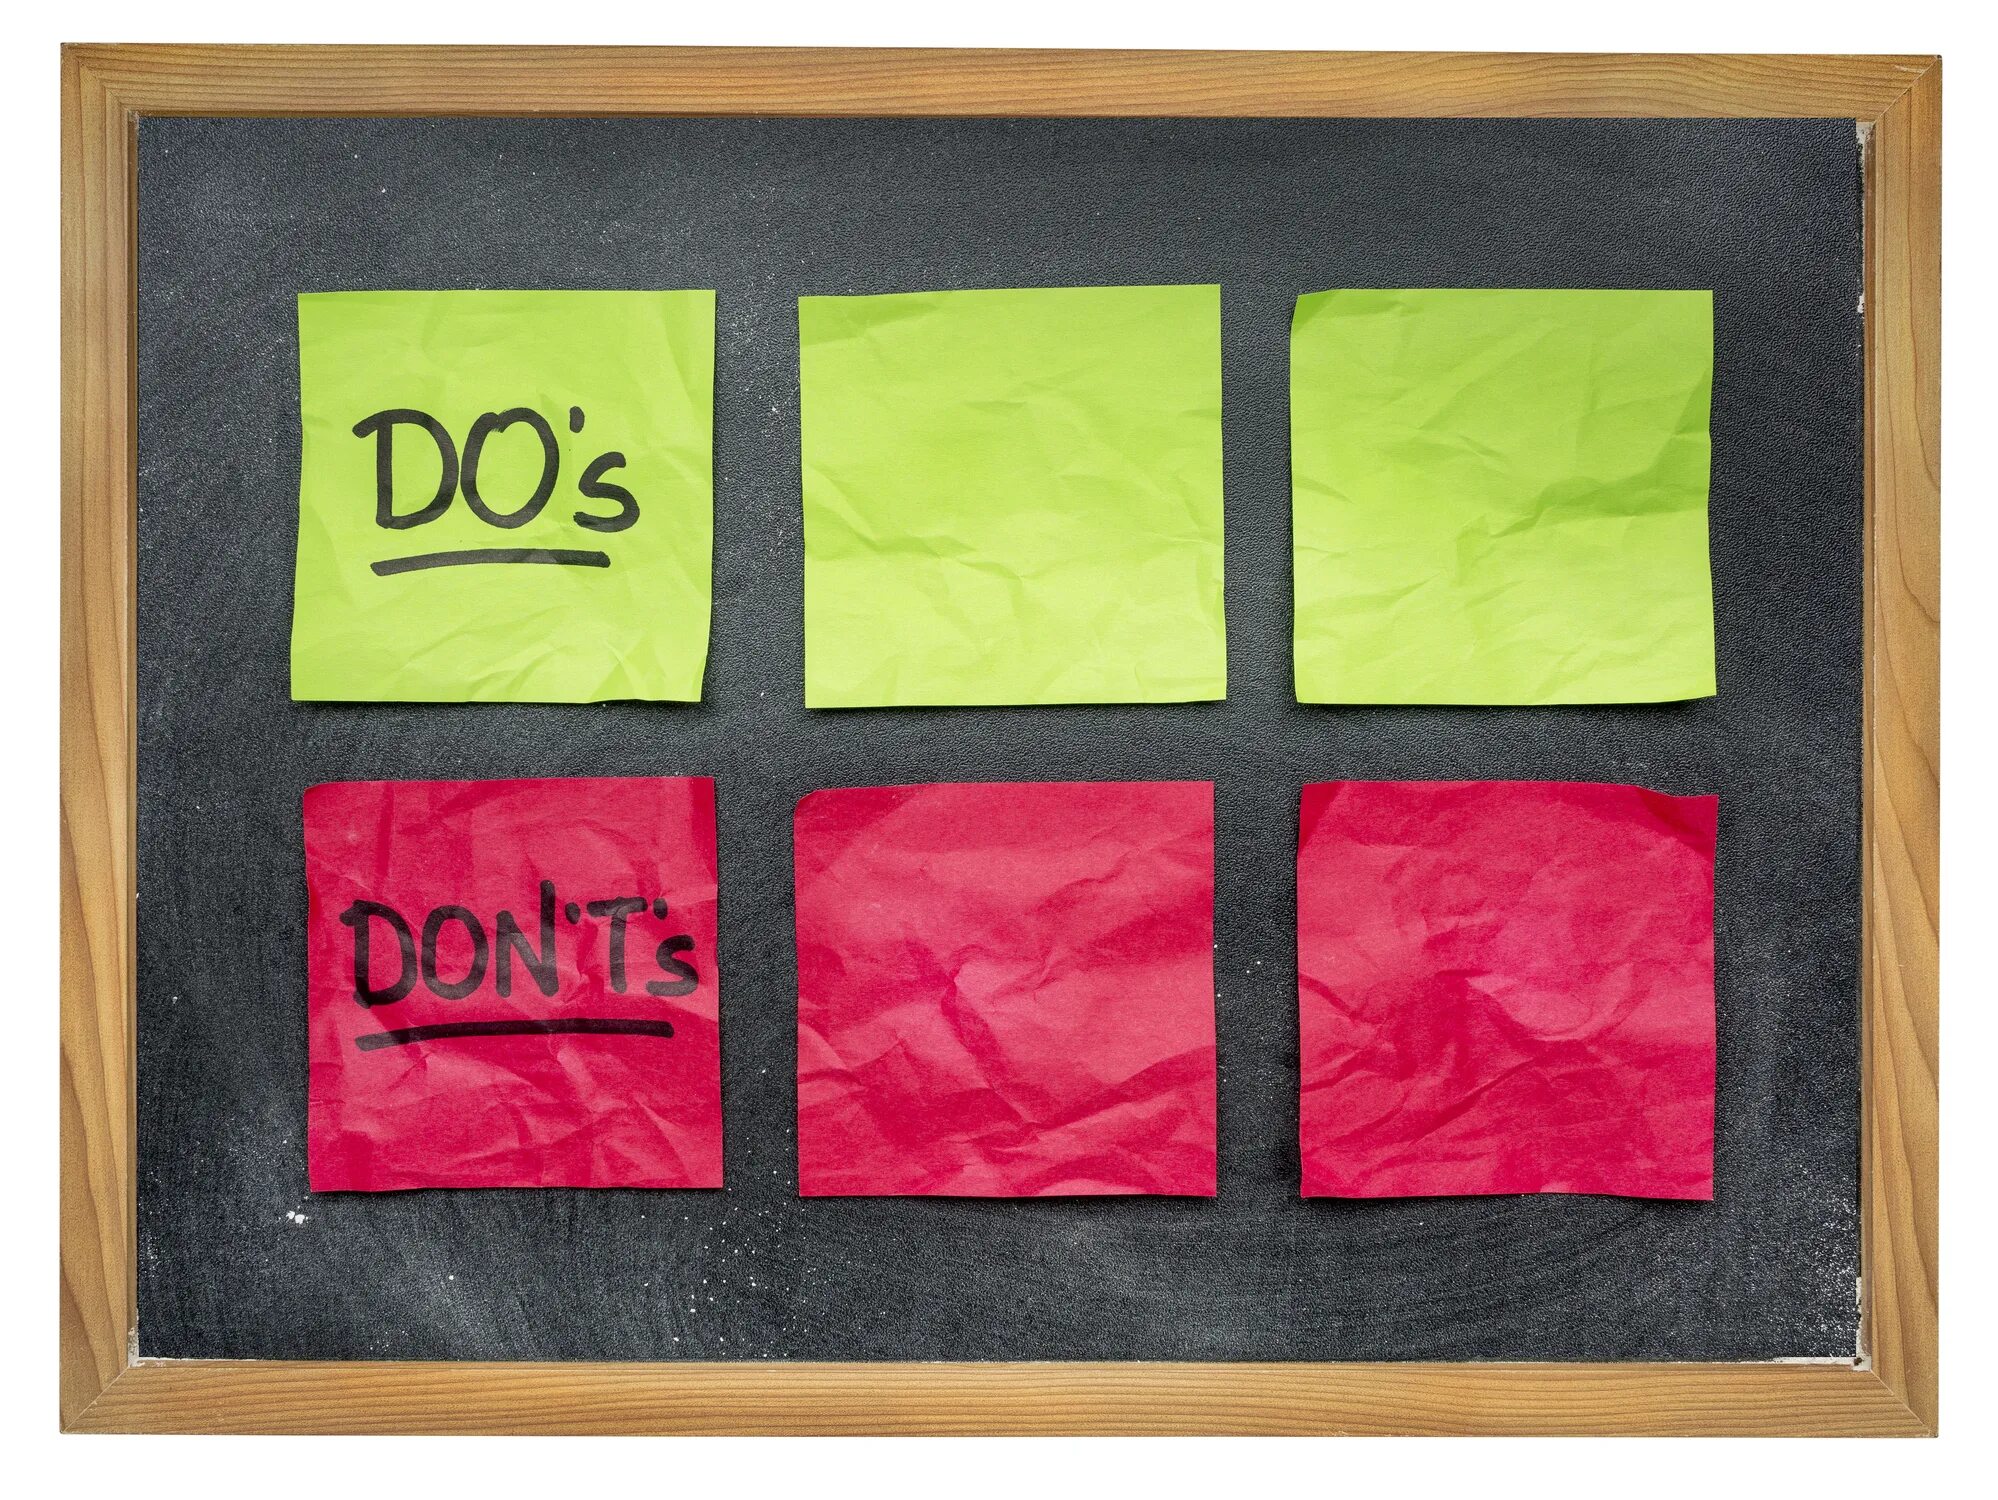 Does and donts. Do's and don'TS. Dos and donts in writing a story. Diet 5 do's and dont's.